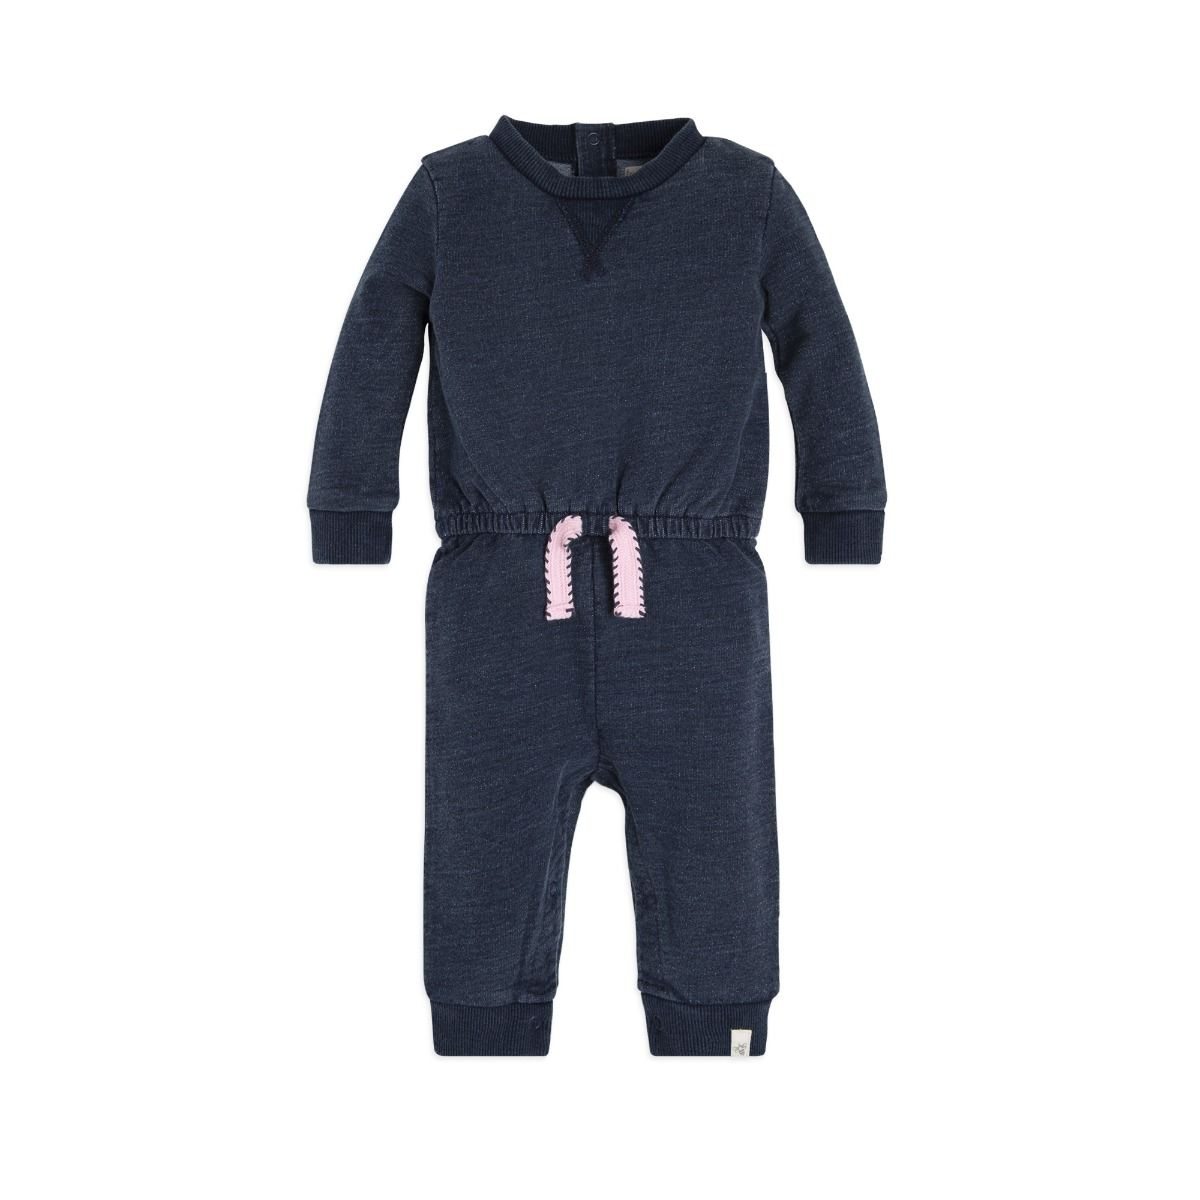 French Terry Denim Wash Organic Baby One Piece Jumpsuit